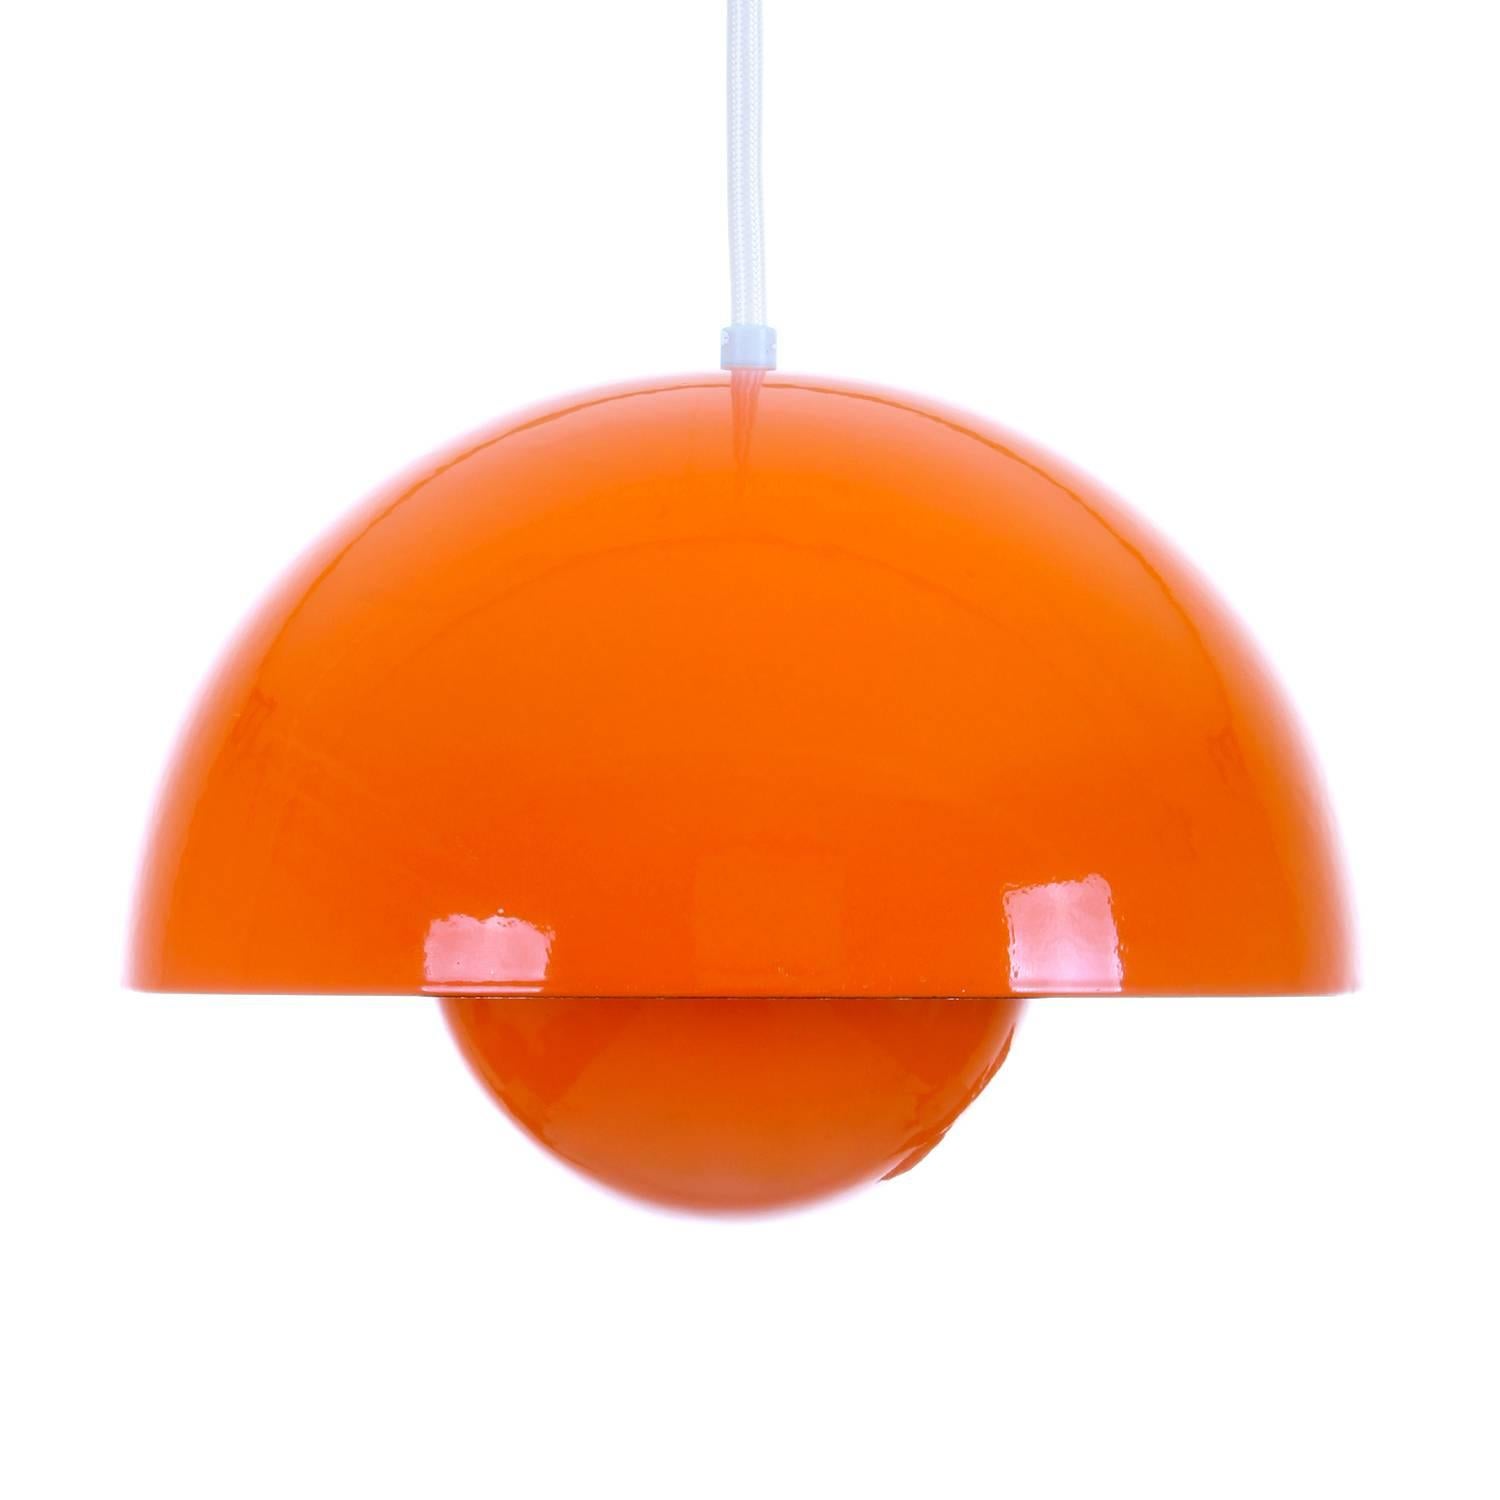 Flowerpot- orange enameled pendant by Verner Panton in 1968 and produced by Louis Poulsen. Iconic 1960's lighting design in excellent vintage condition!

We have 3 pieces left!!

Flowerpot is a stunning light, simple and organic, with an almost